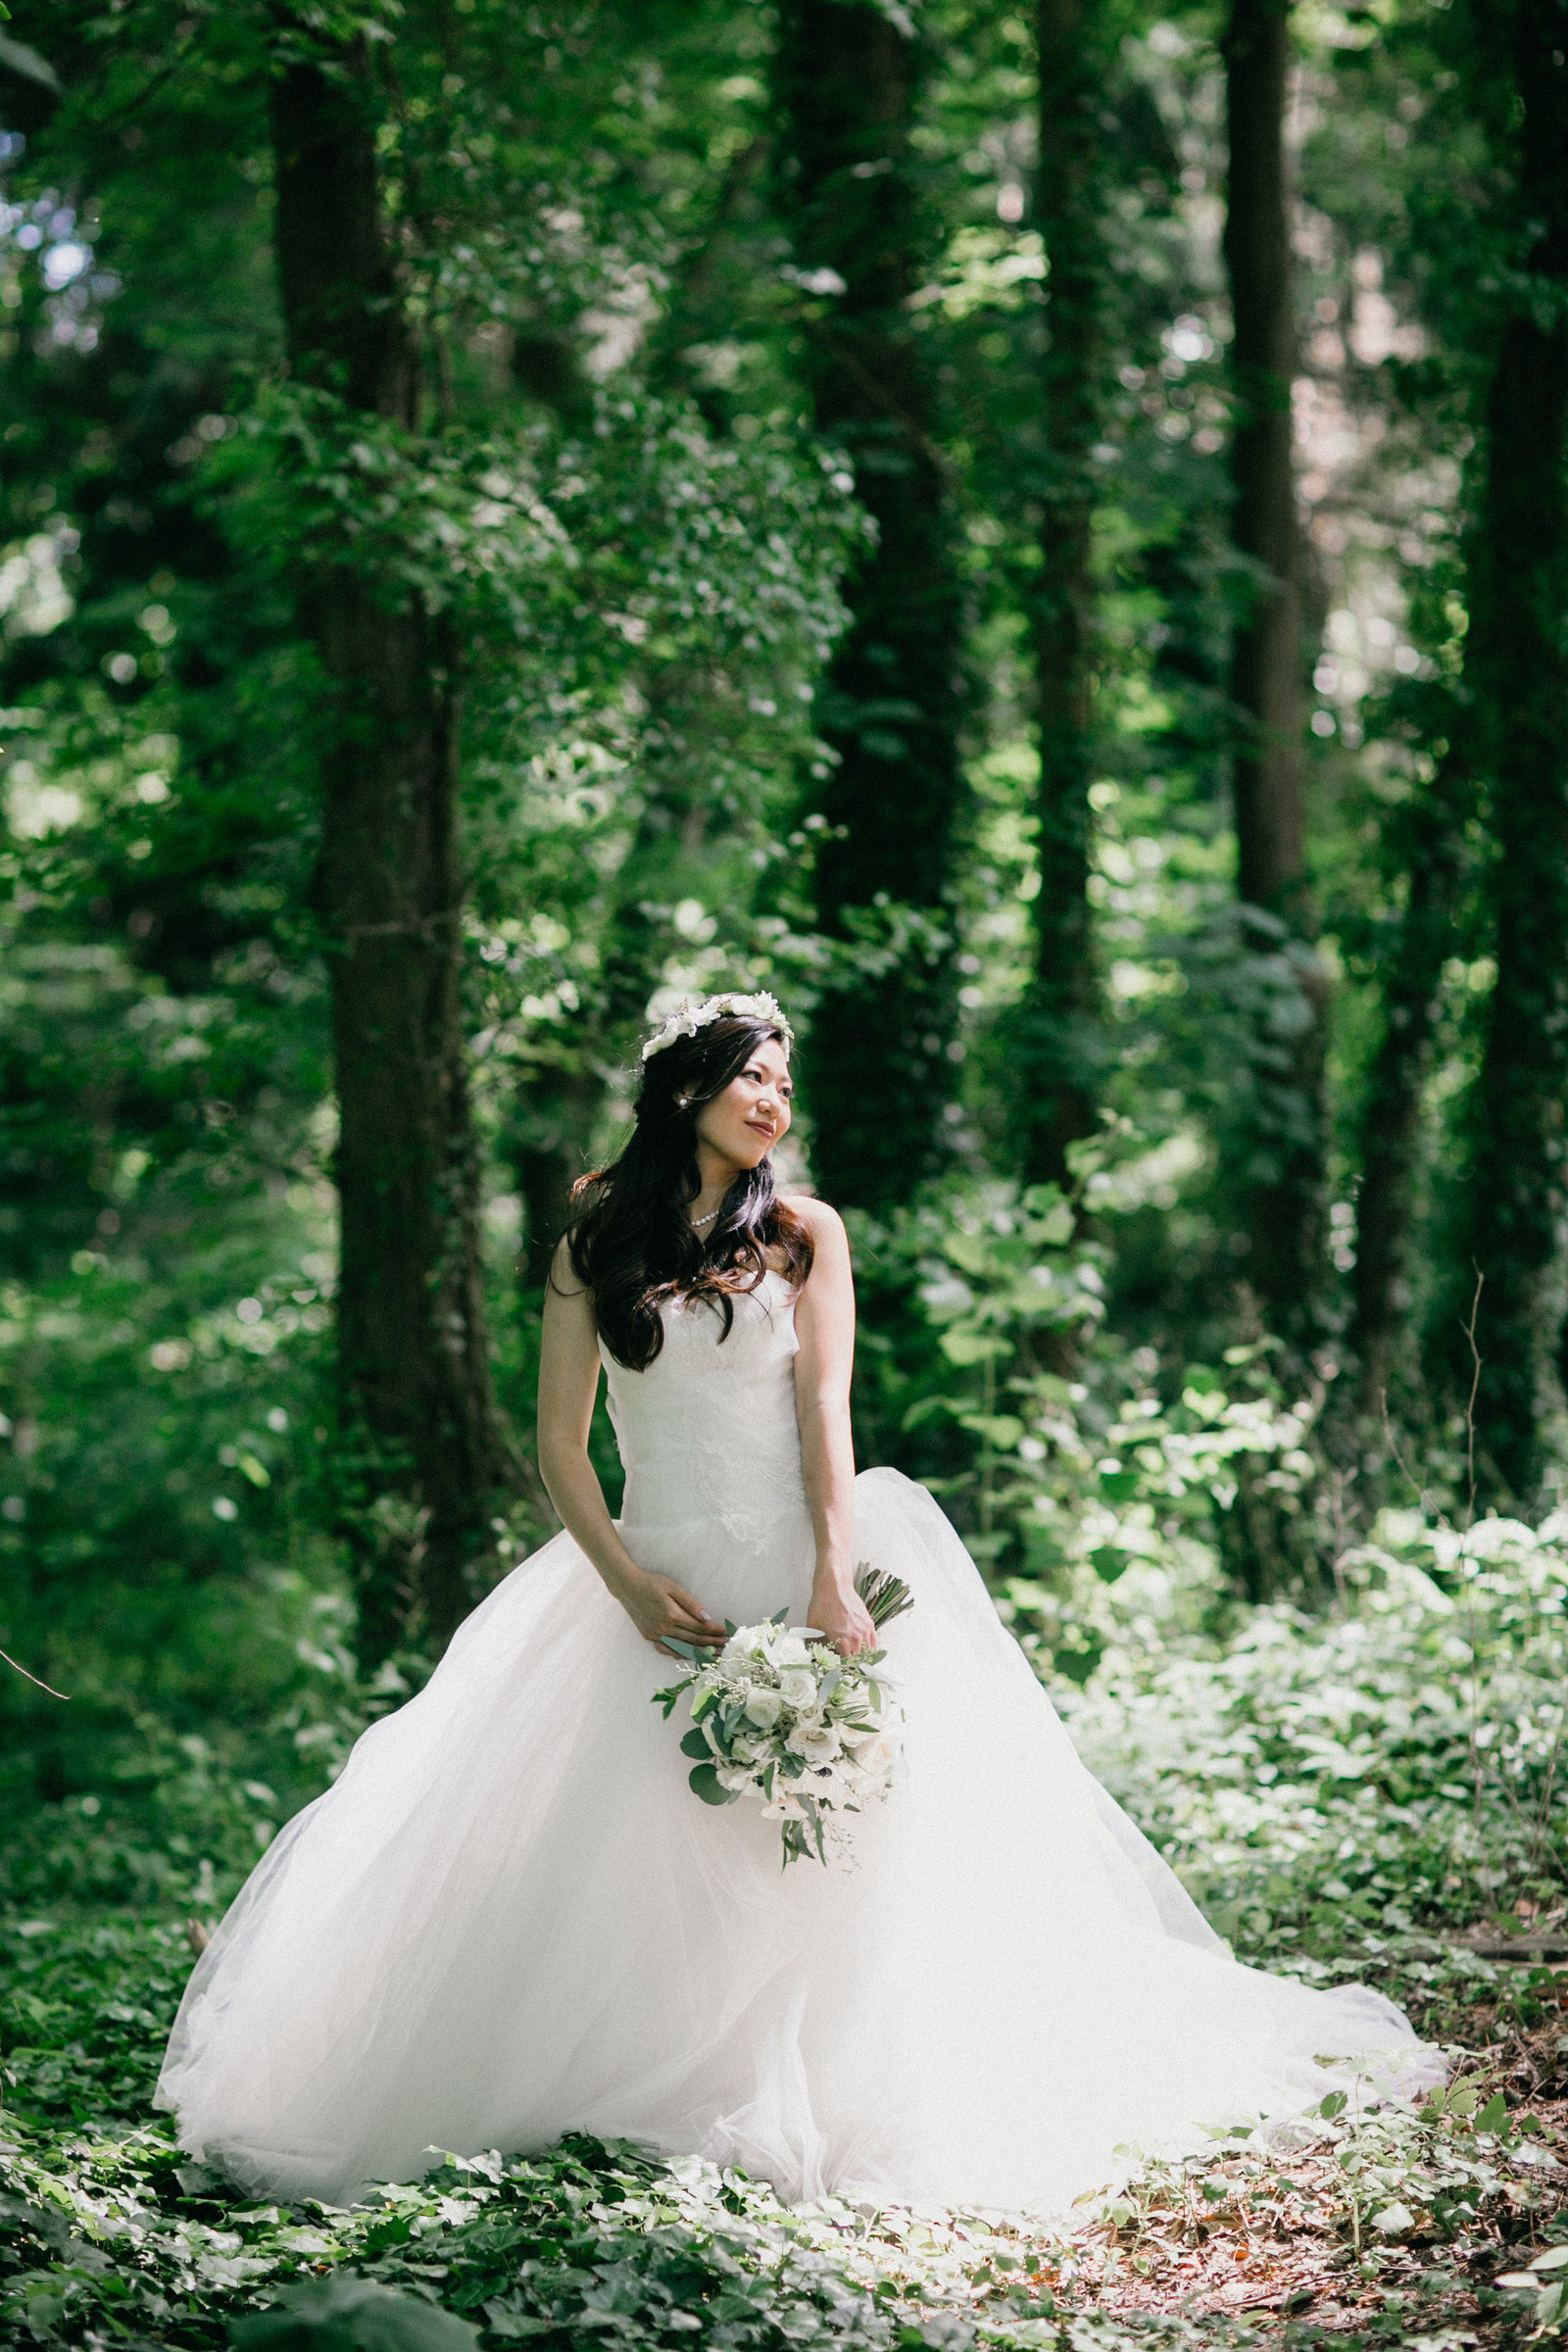 Gorgeous shot of the bride in her gown amongst the lush green trees of Fernbrook Farm Inn.